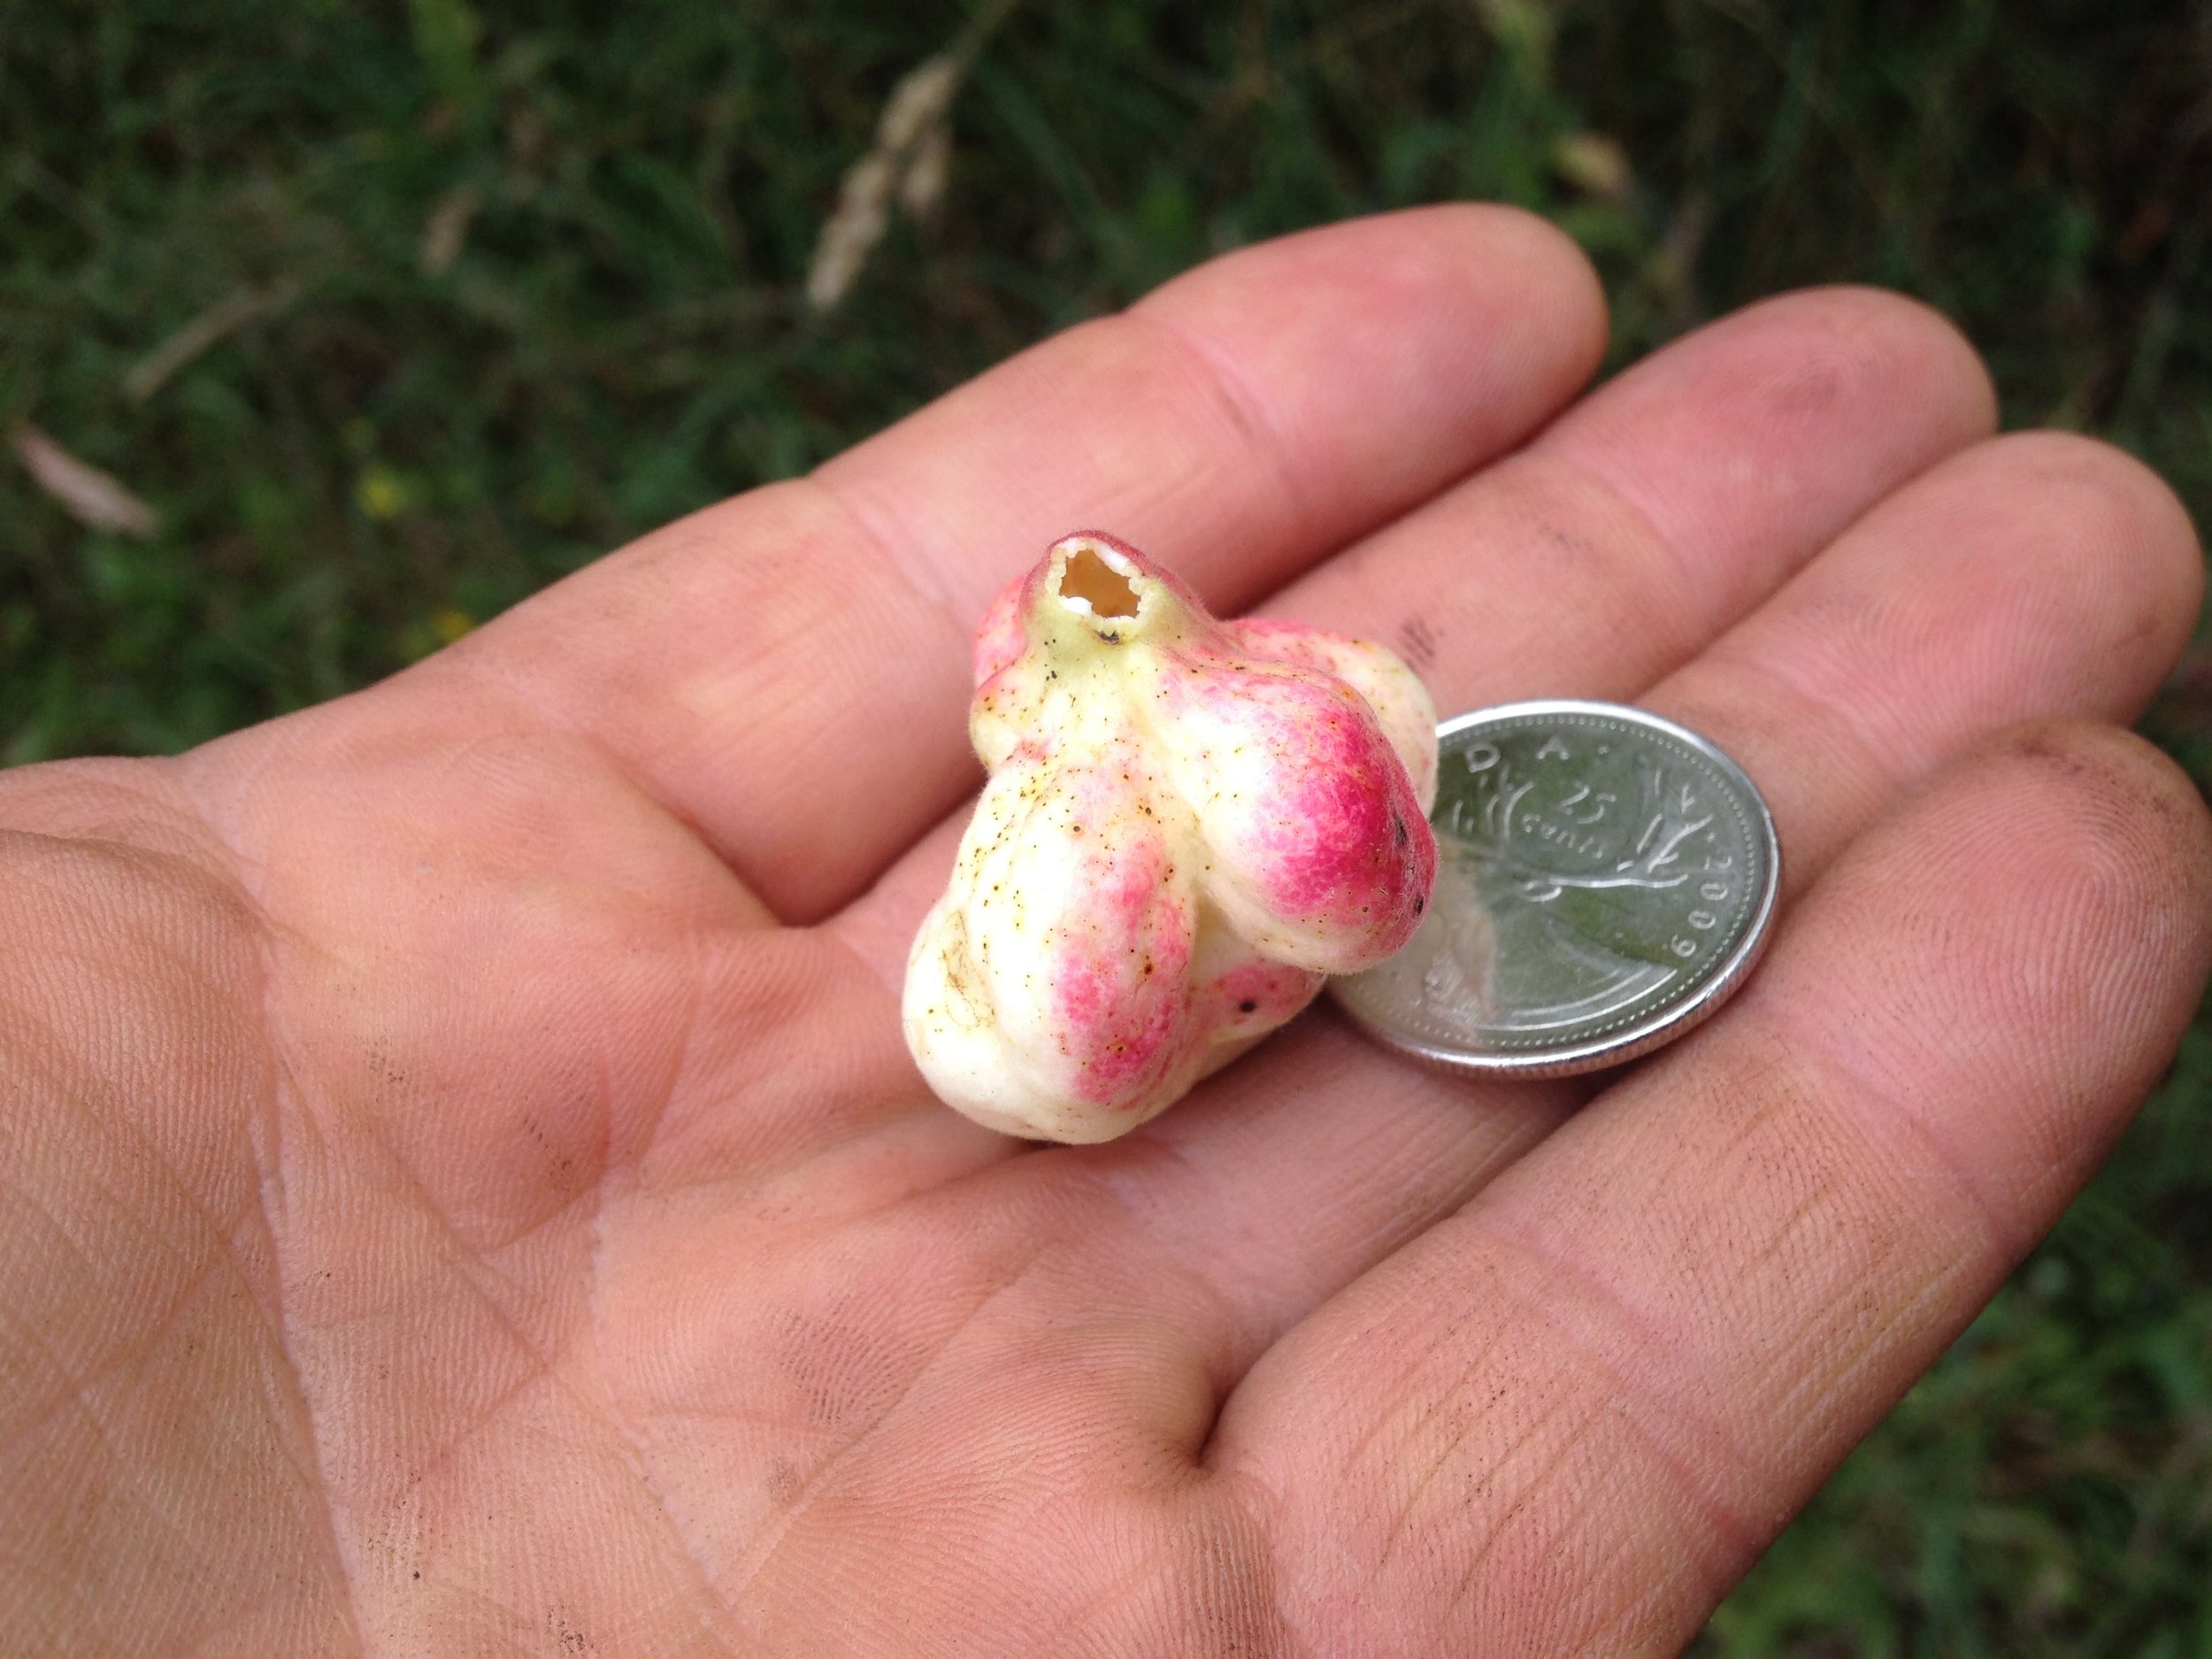  A gall I broke off from the leaf stalk. Coin is 23.88 mm in diameter. 